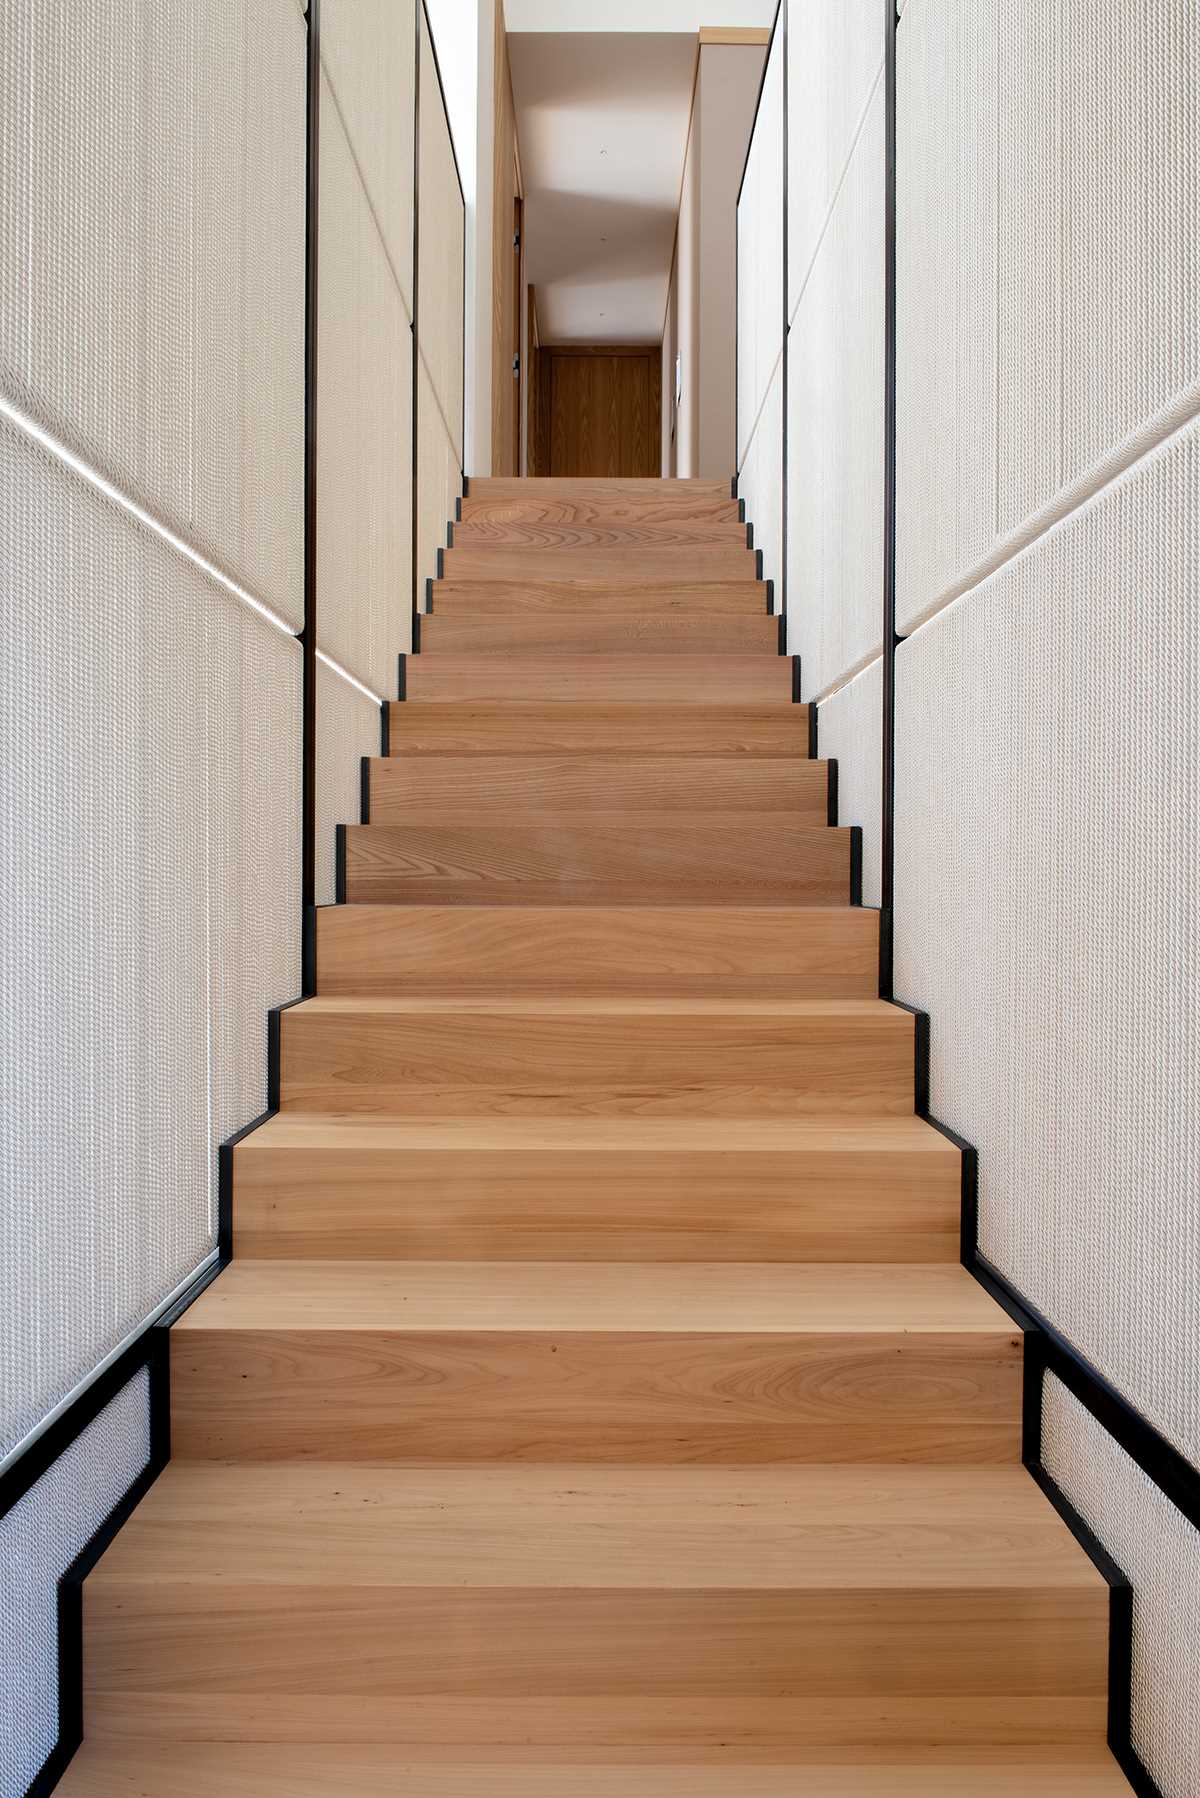 Modern wood stairs lead to a hallway with a wall of wood cabinets.